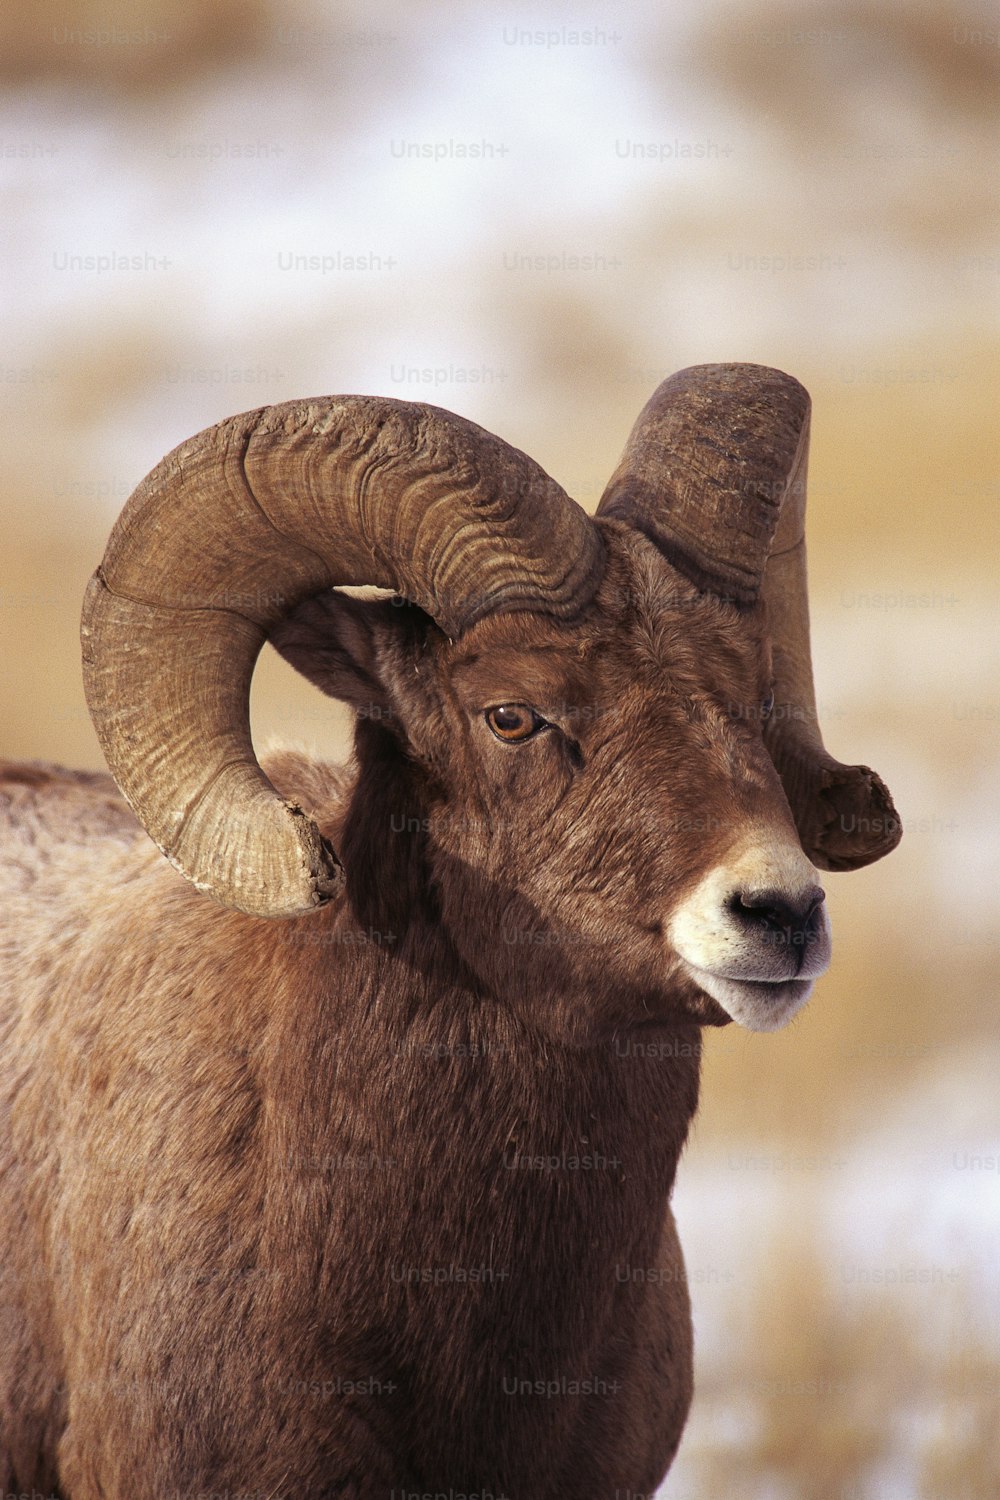 a ram with large horns standing in a field